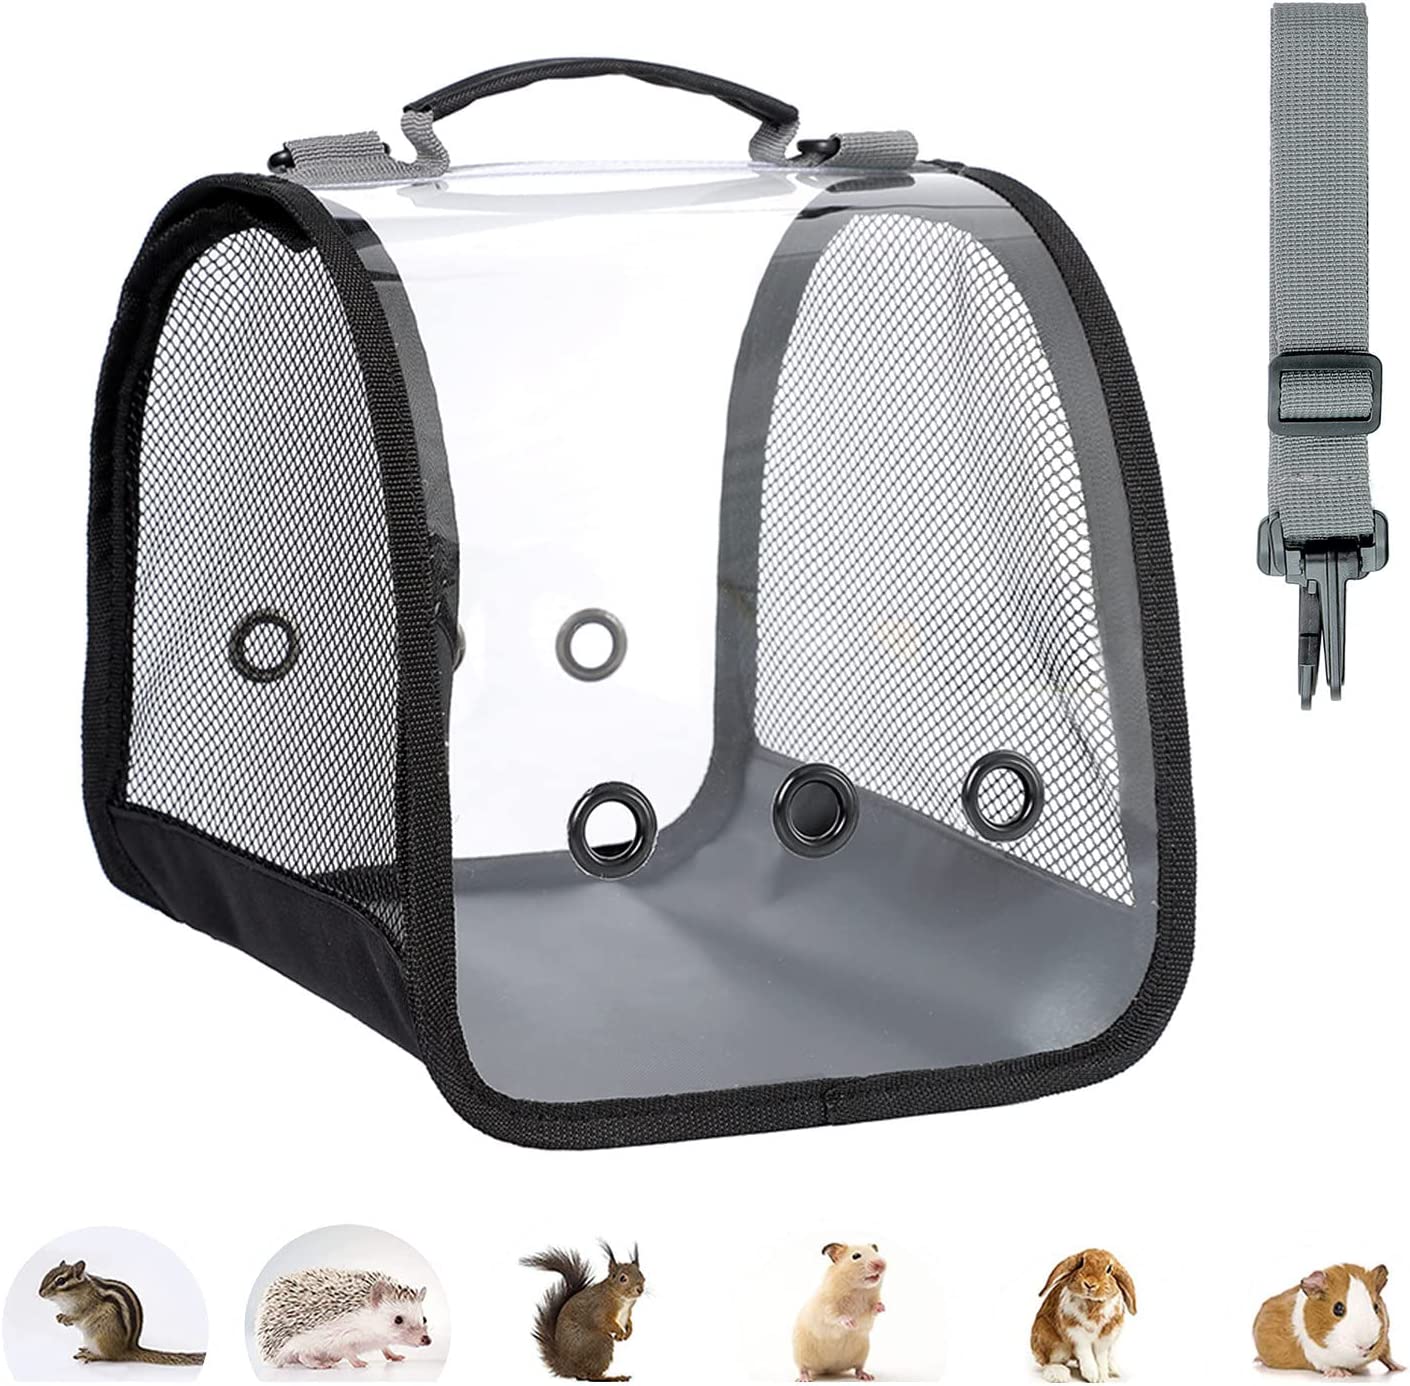 Hedgehog Carrier With Outdoor Breathable Mesh Window Self-Locking Zipper